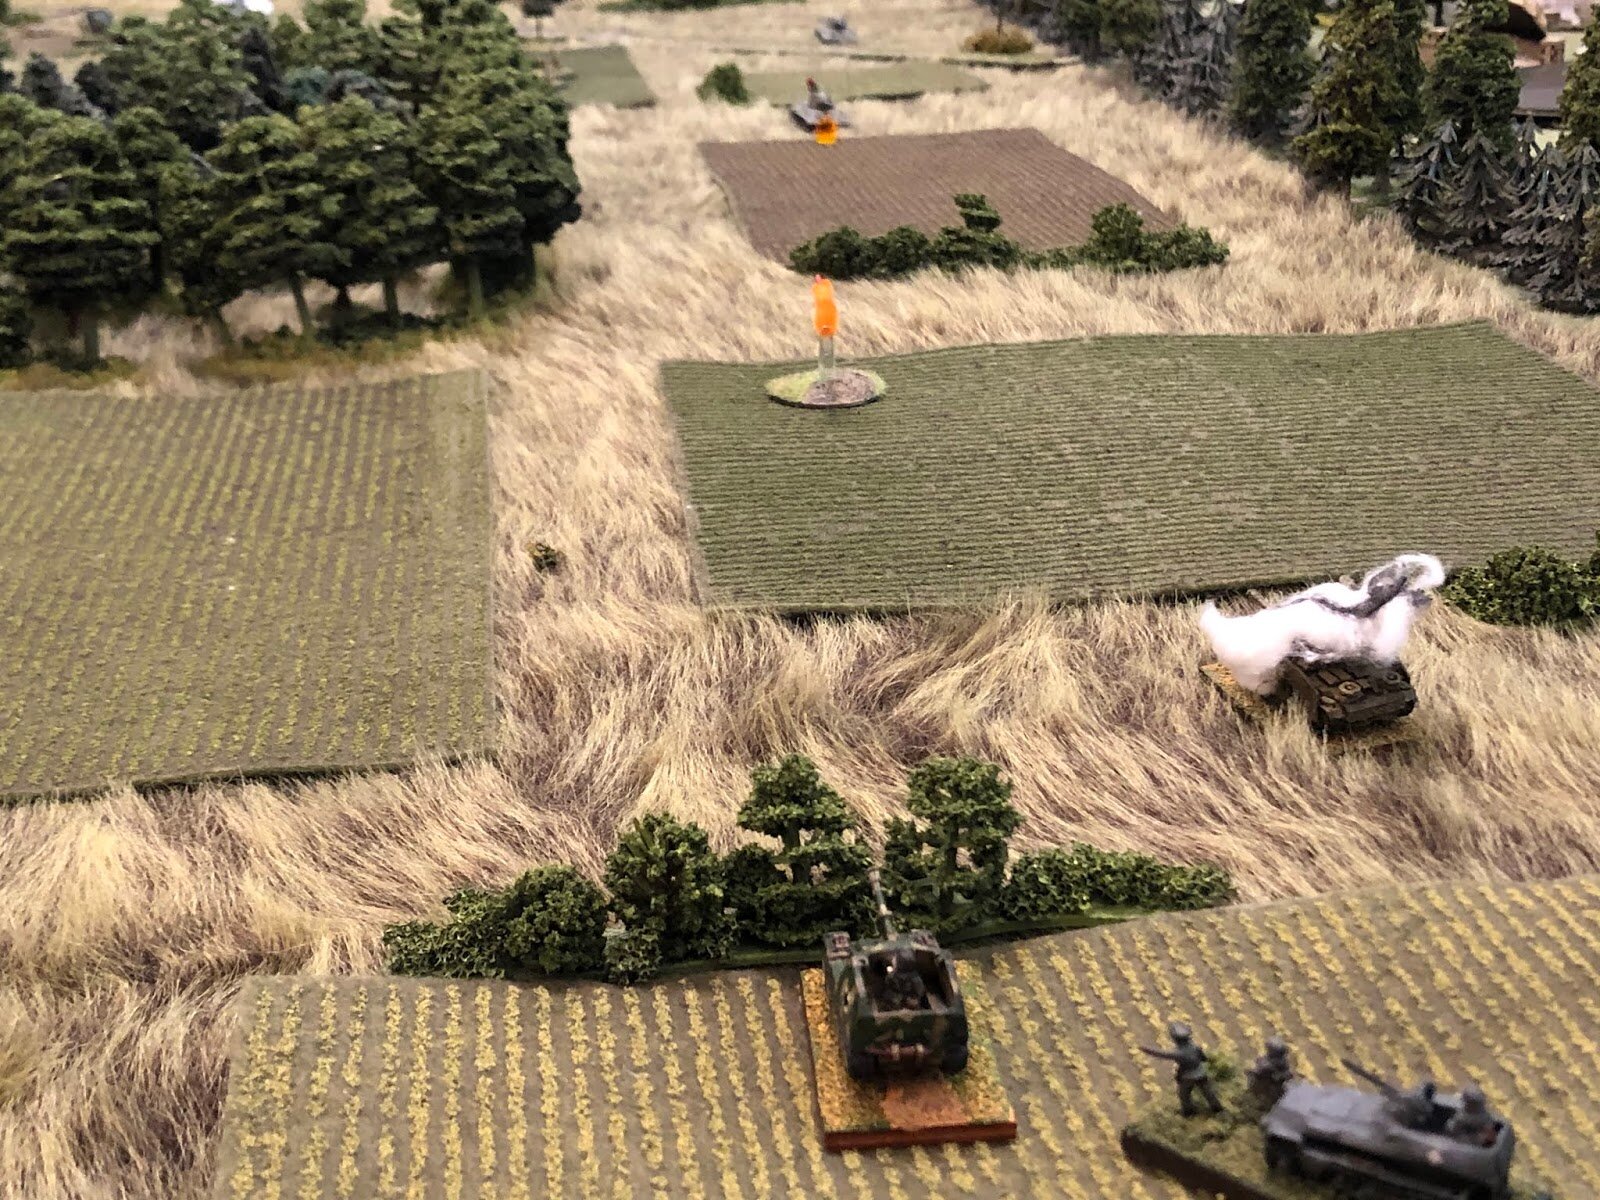  BAM! The Marder fires...  